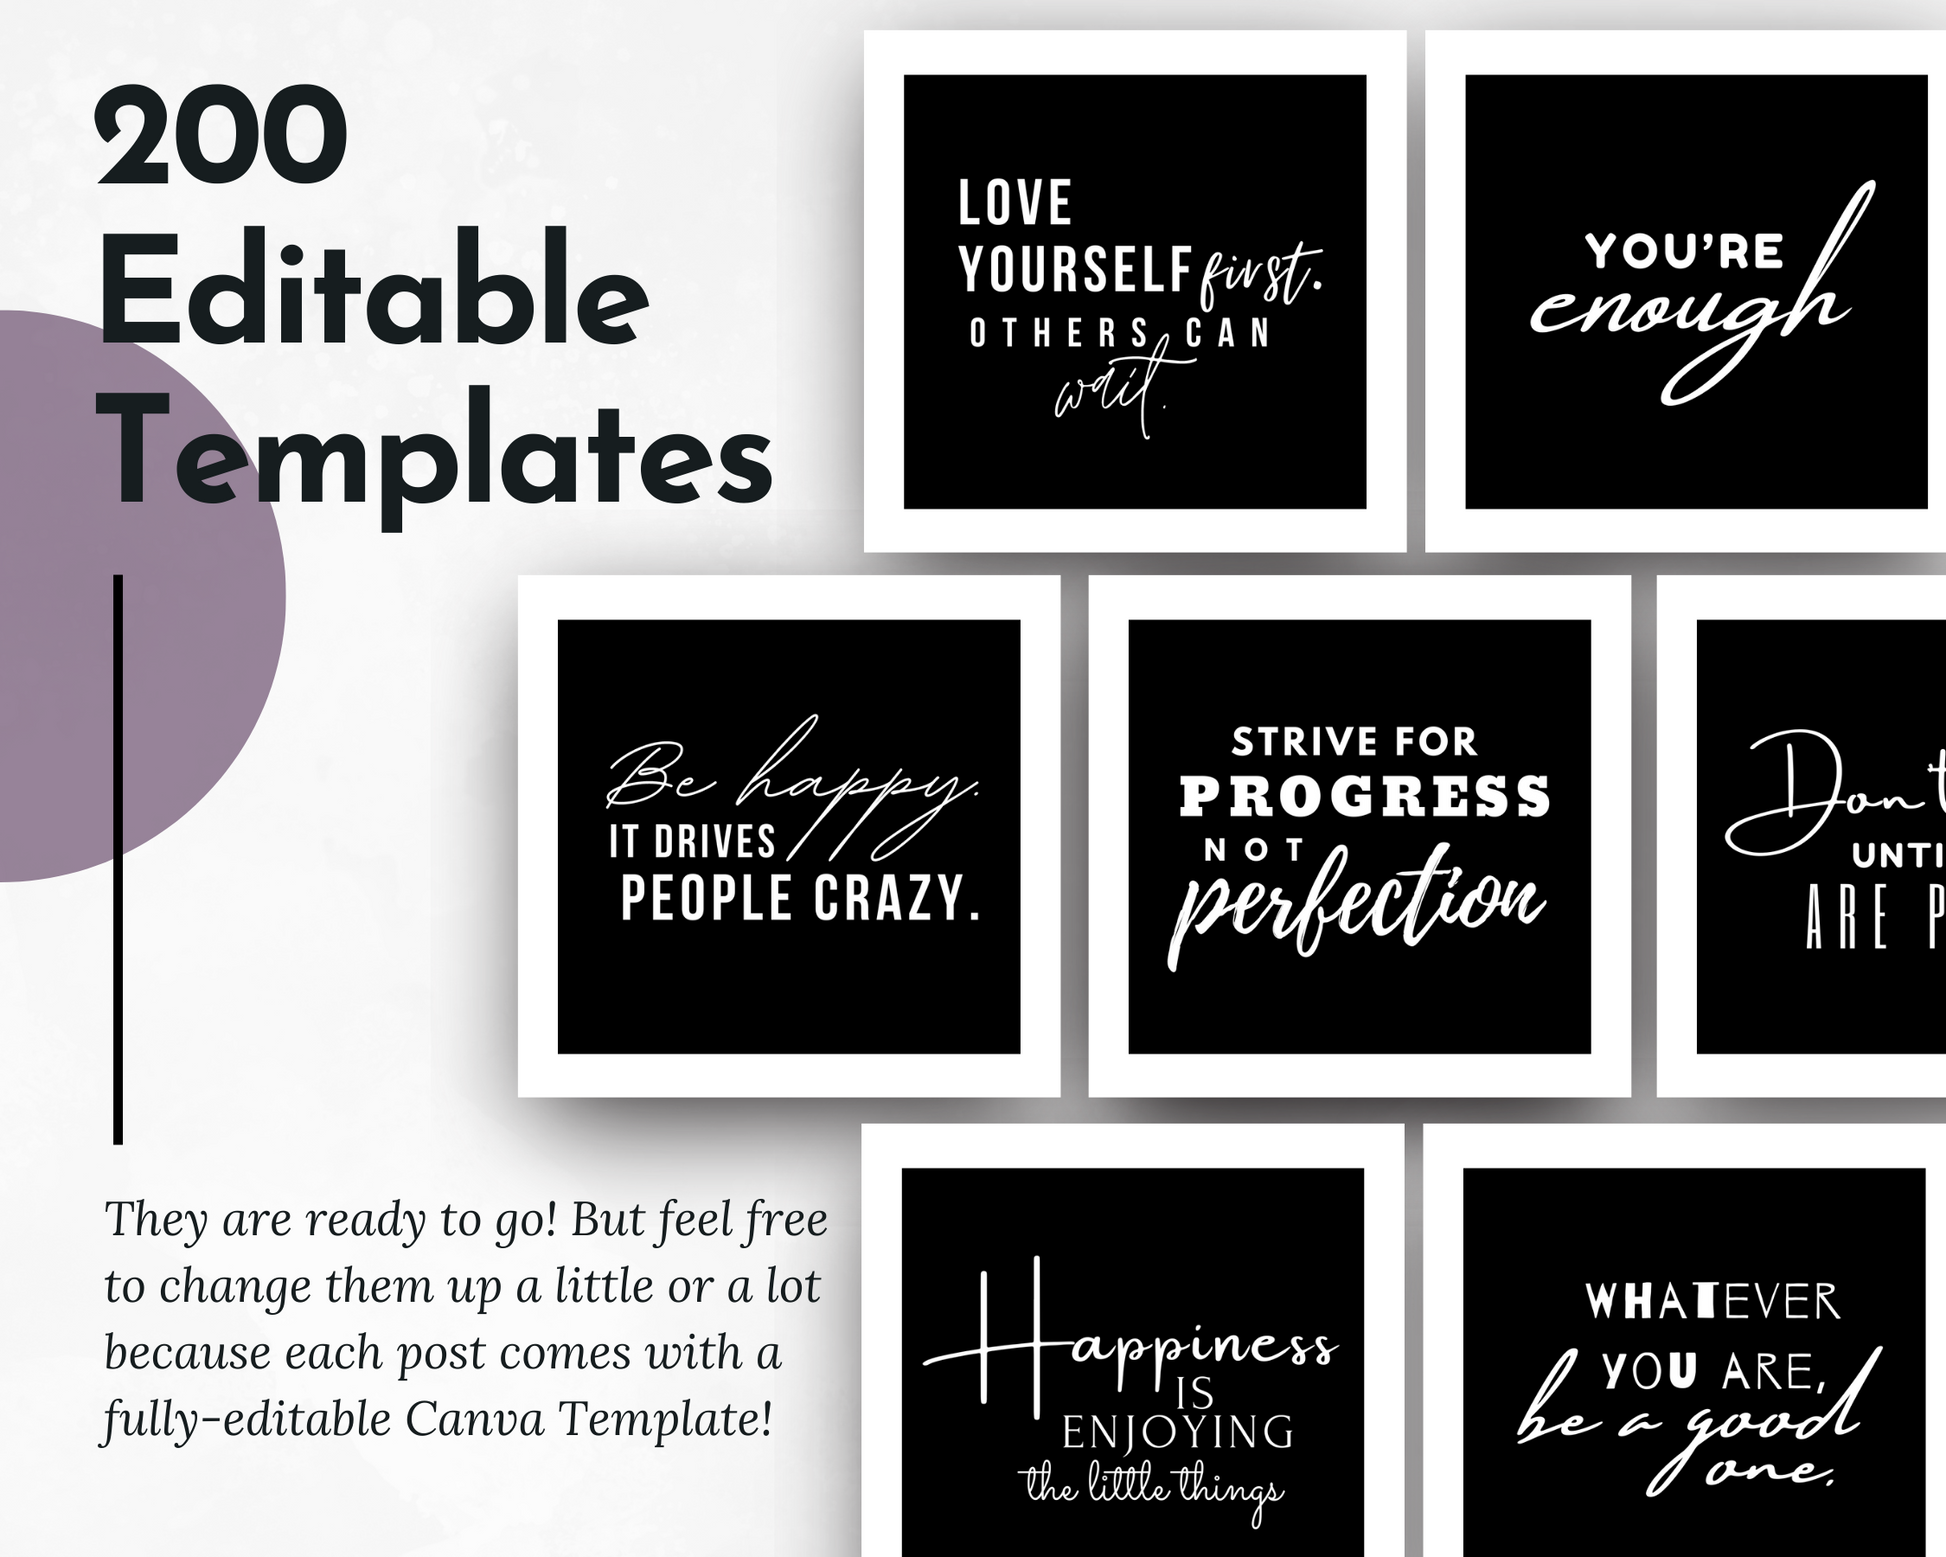 200 editable social media image templates for Empowering "Girl Boss Style" content from Socially Inclined's Social Media Post Bundle with Canva Templates.